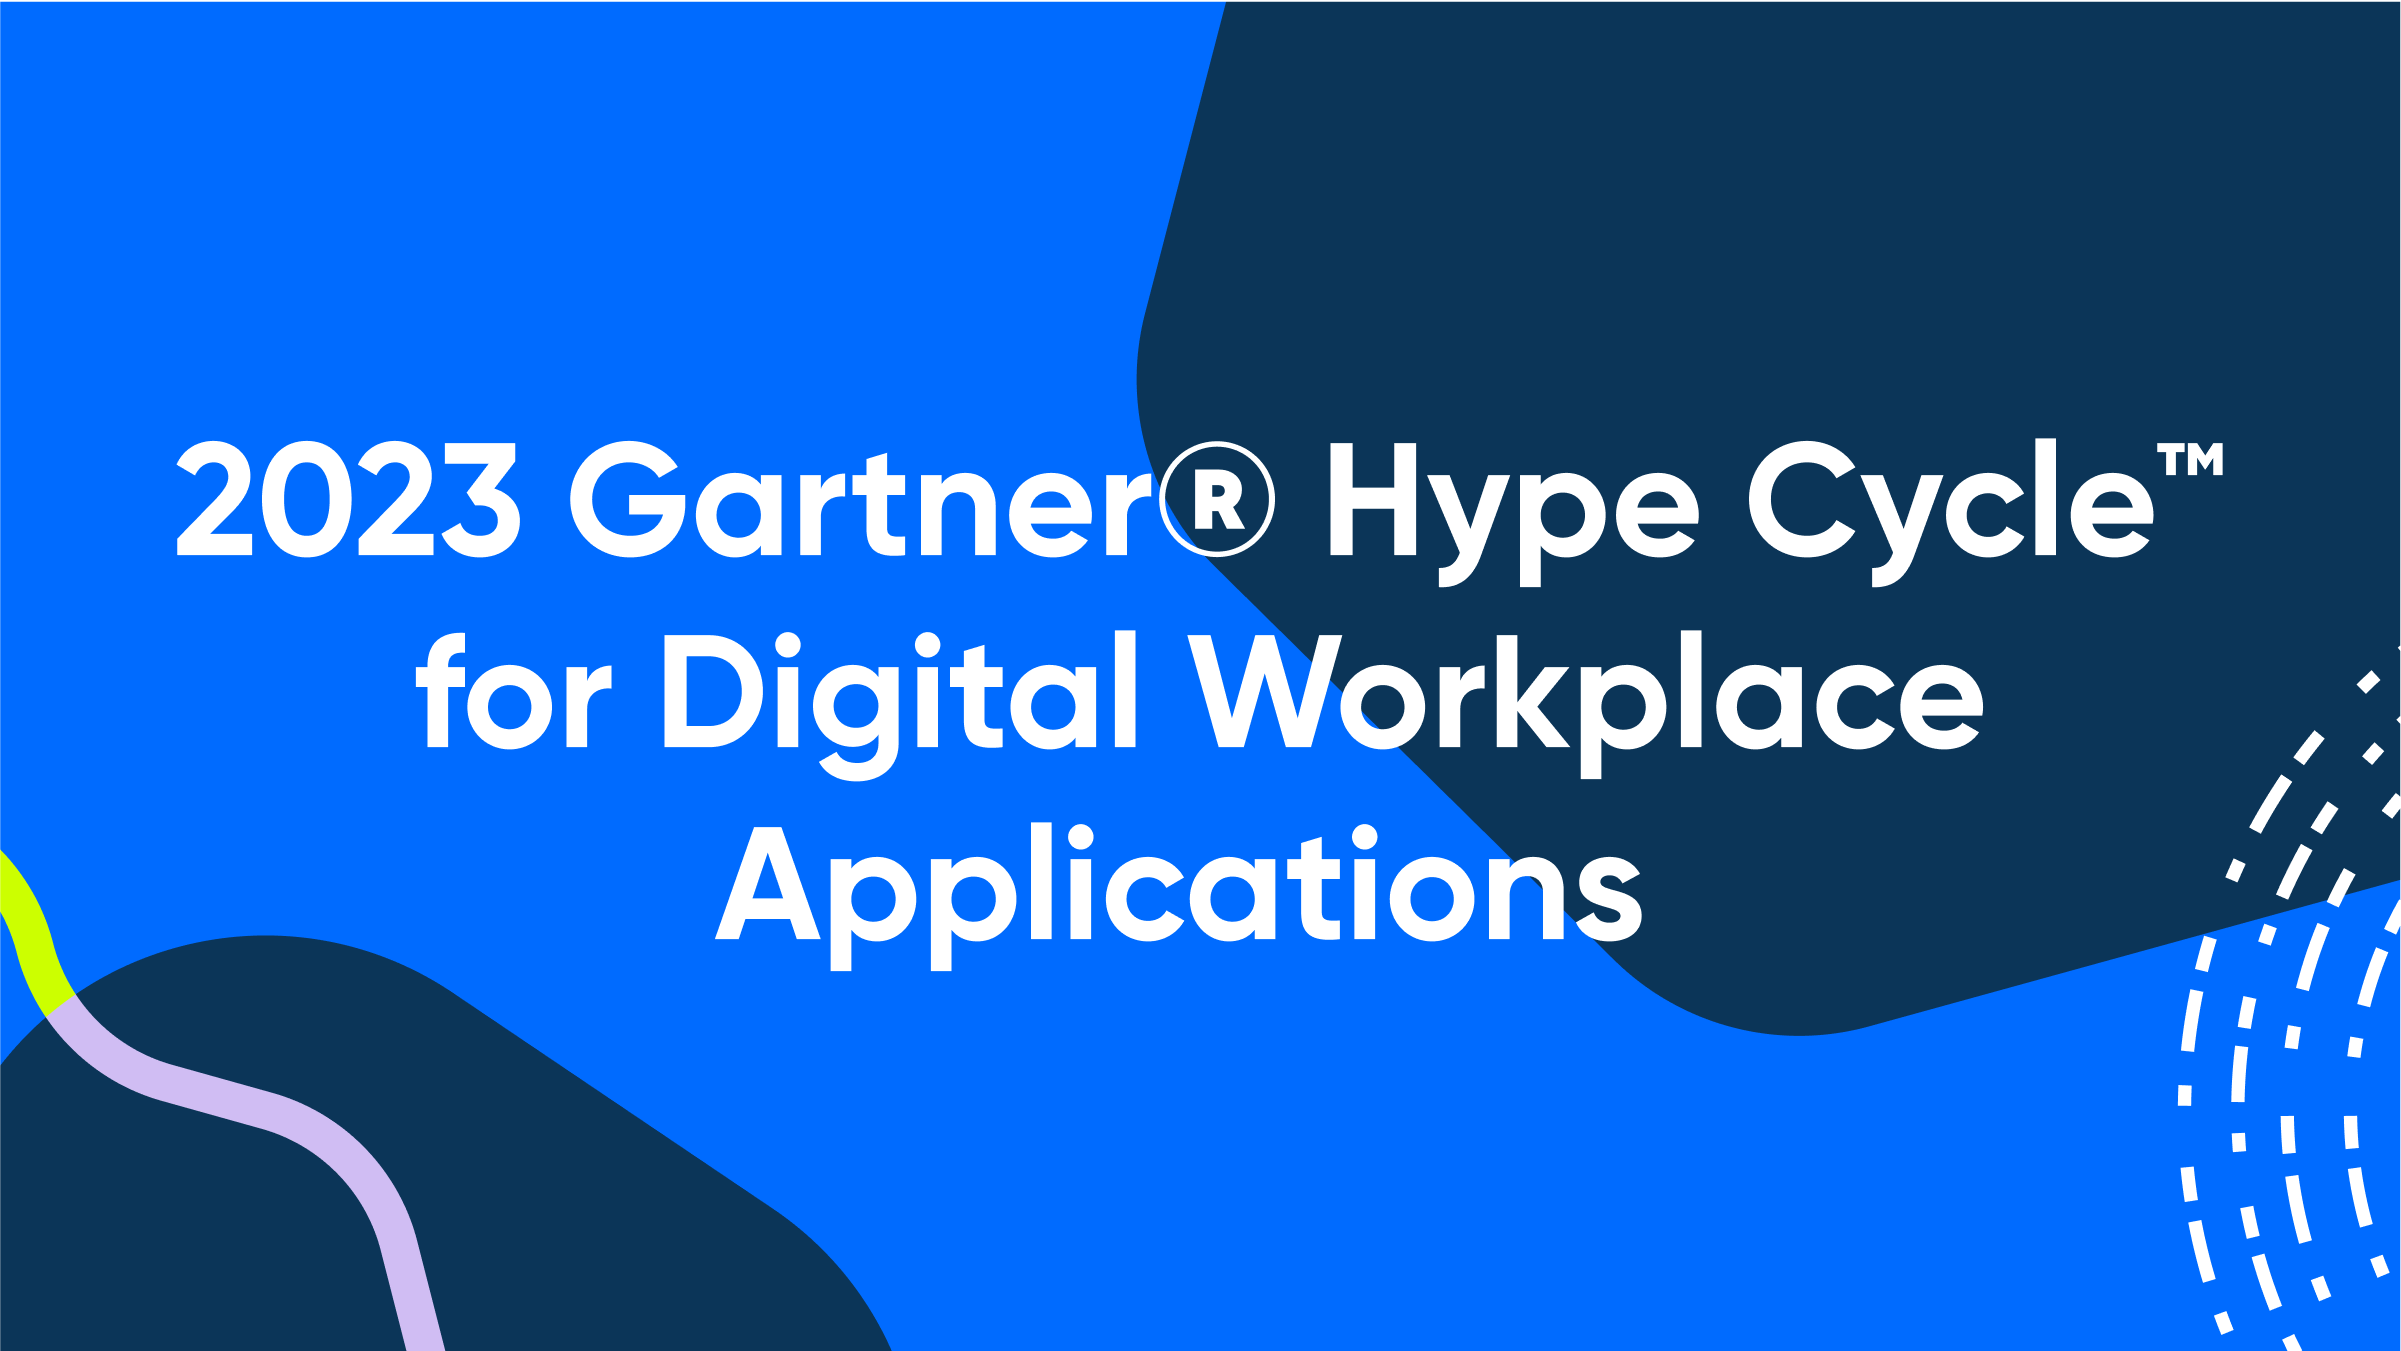 2023 Gartner Hype Cycle for Digital Workplace Applications